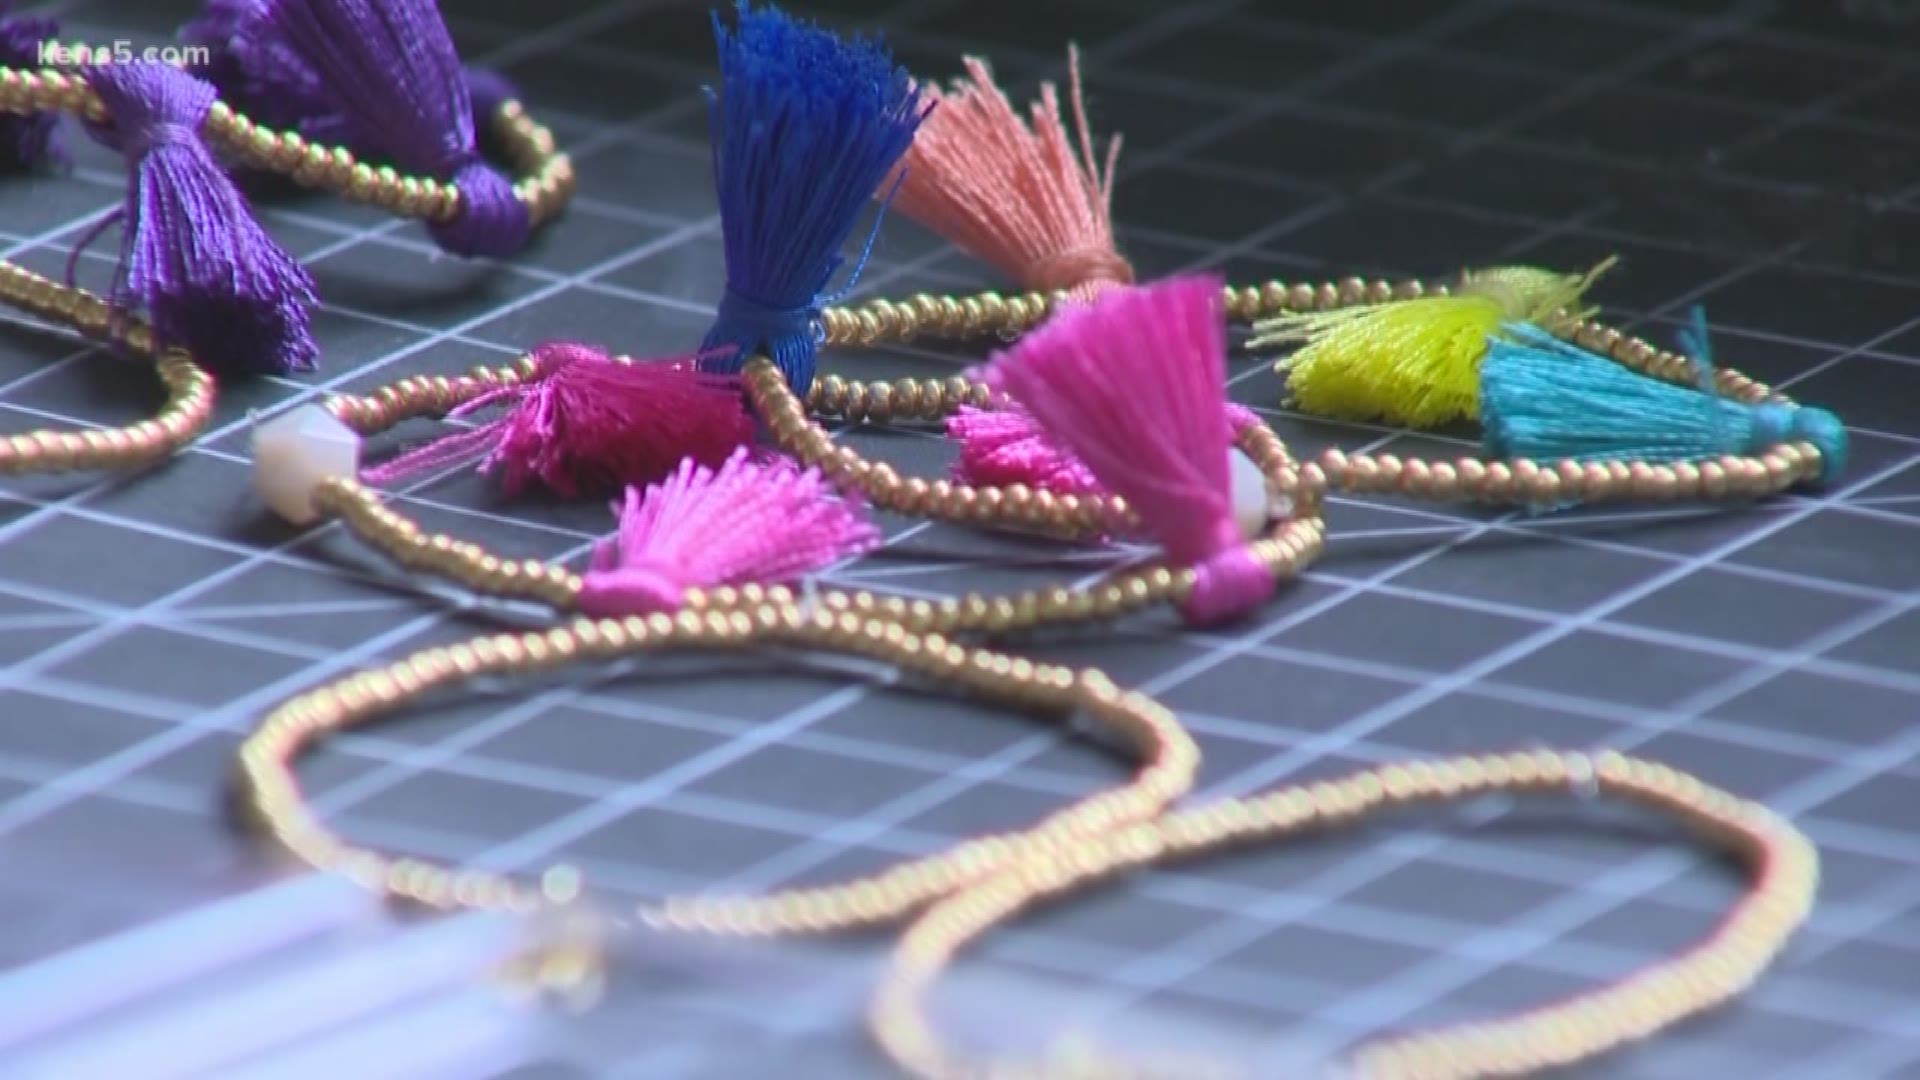 A creative gift turns into a side hustle for a San Antonio woman in this week's Made in SA.